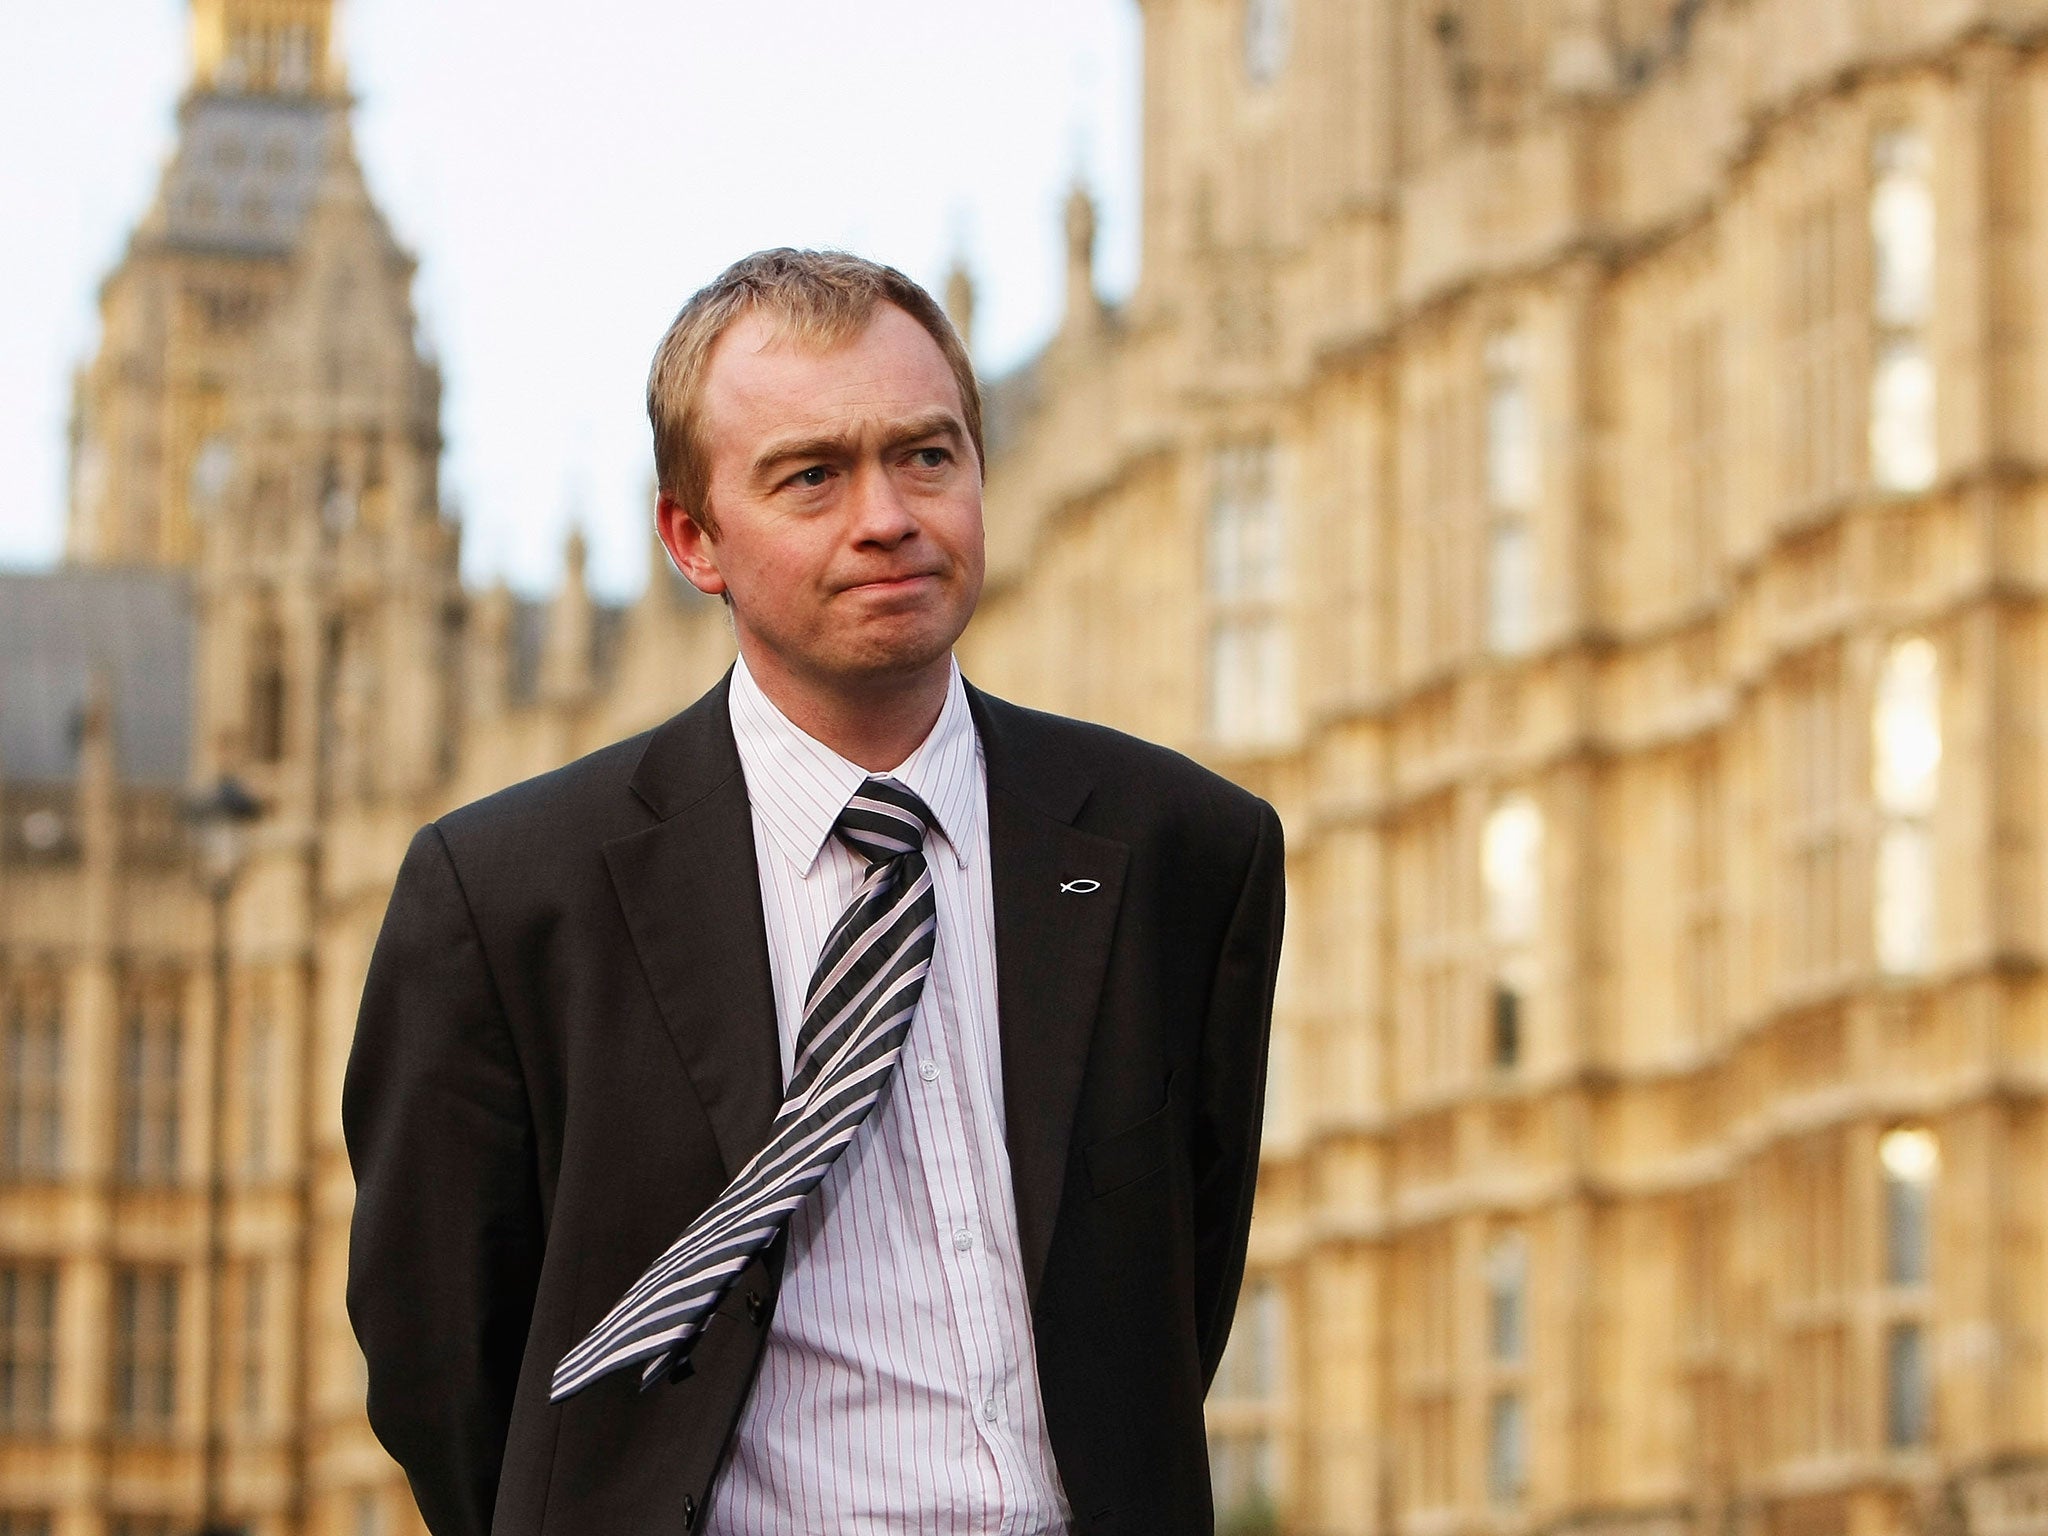 Farron is favourite to be next Lib Dem leader